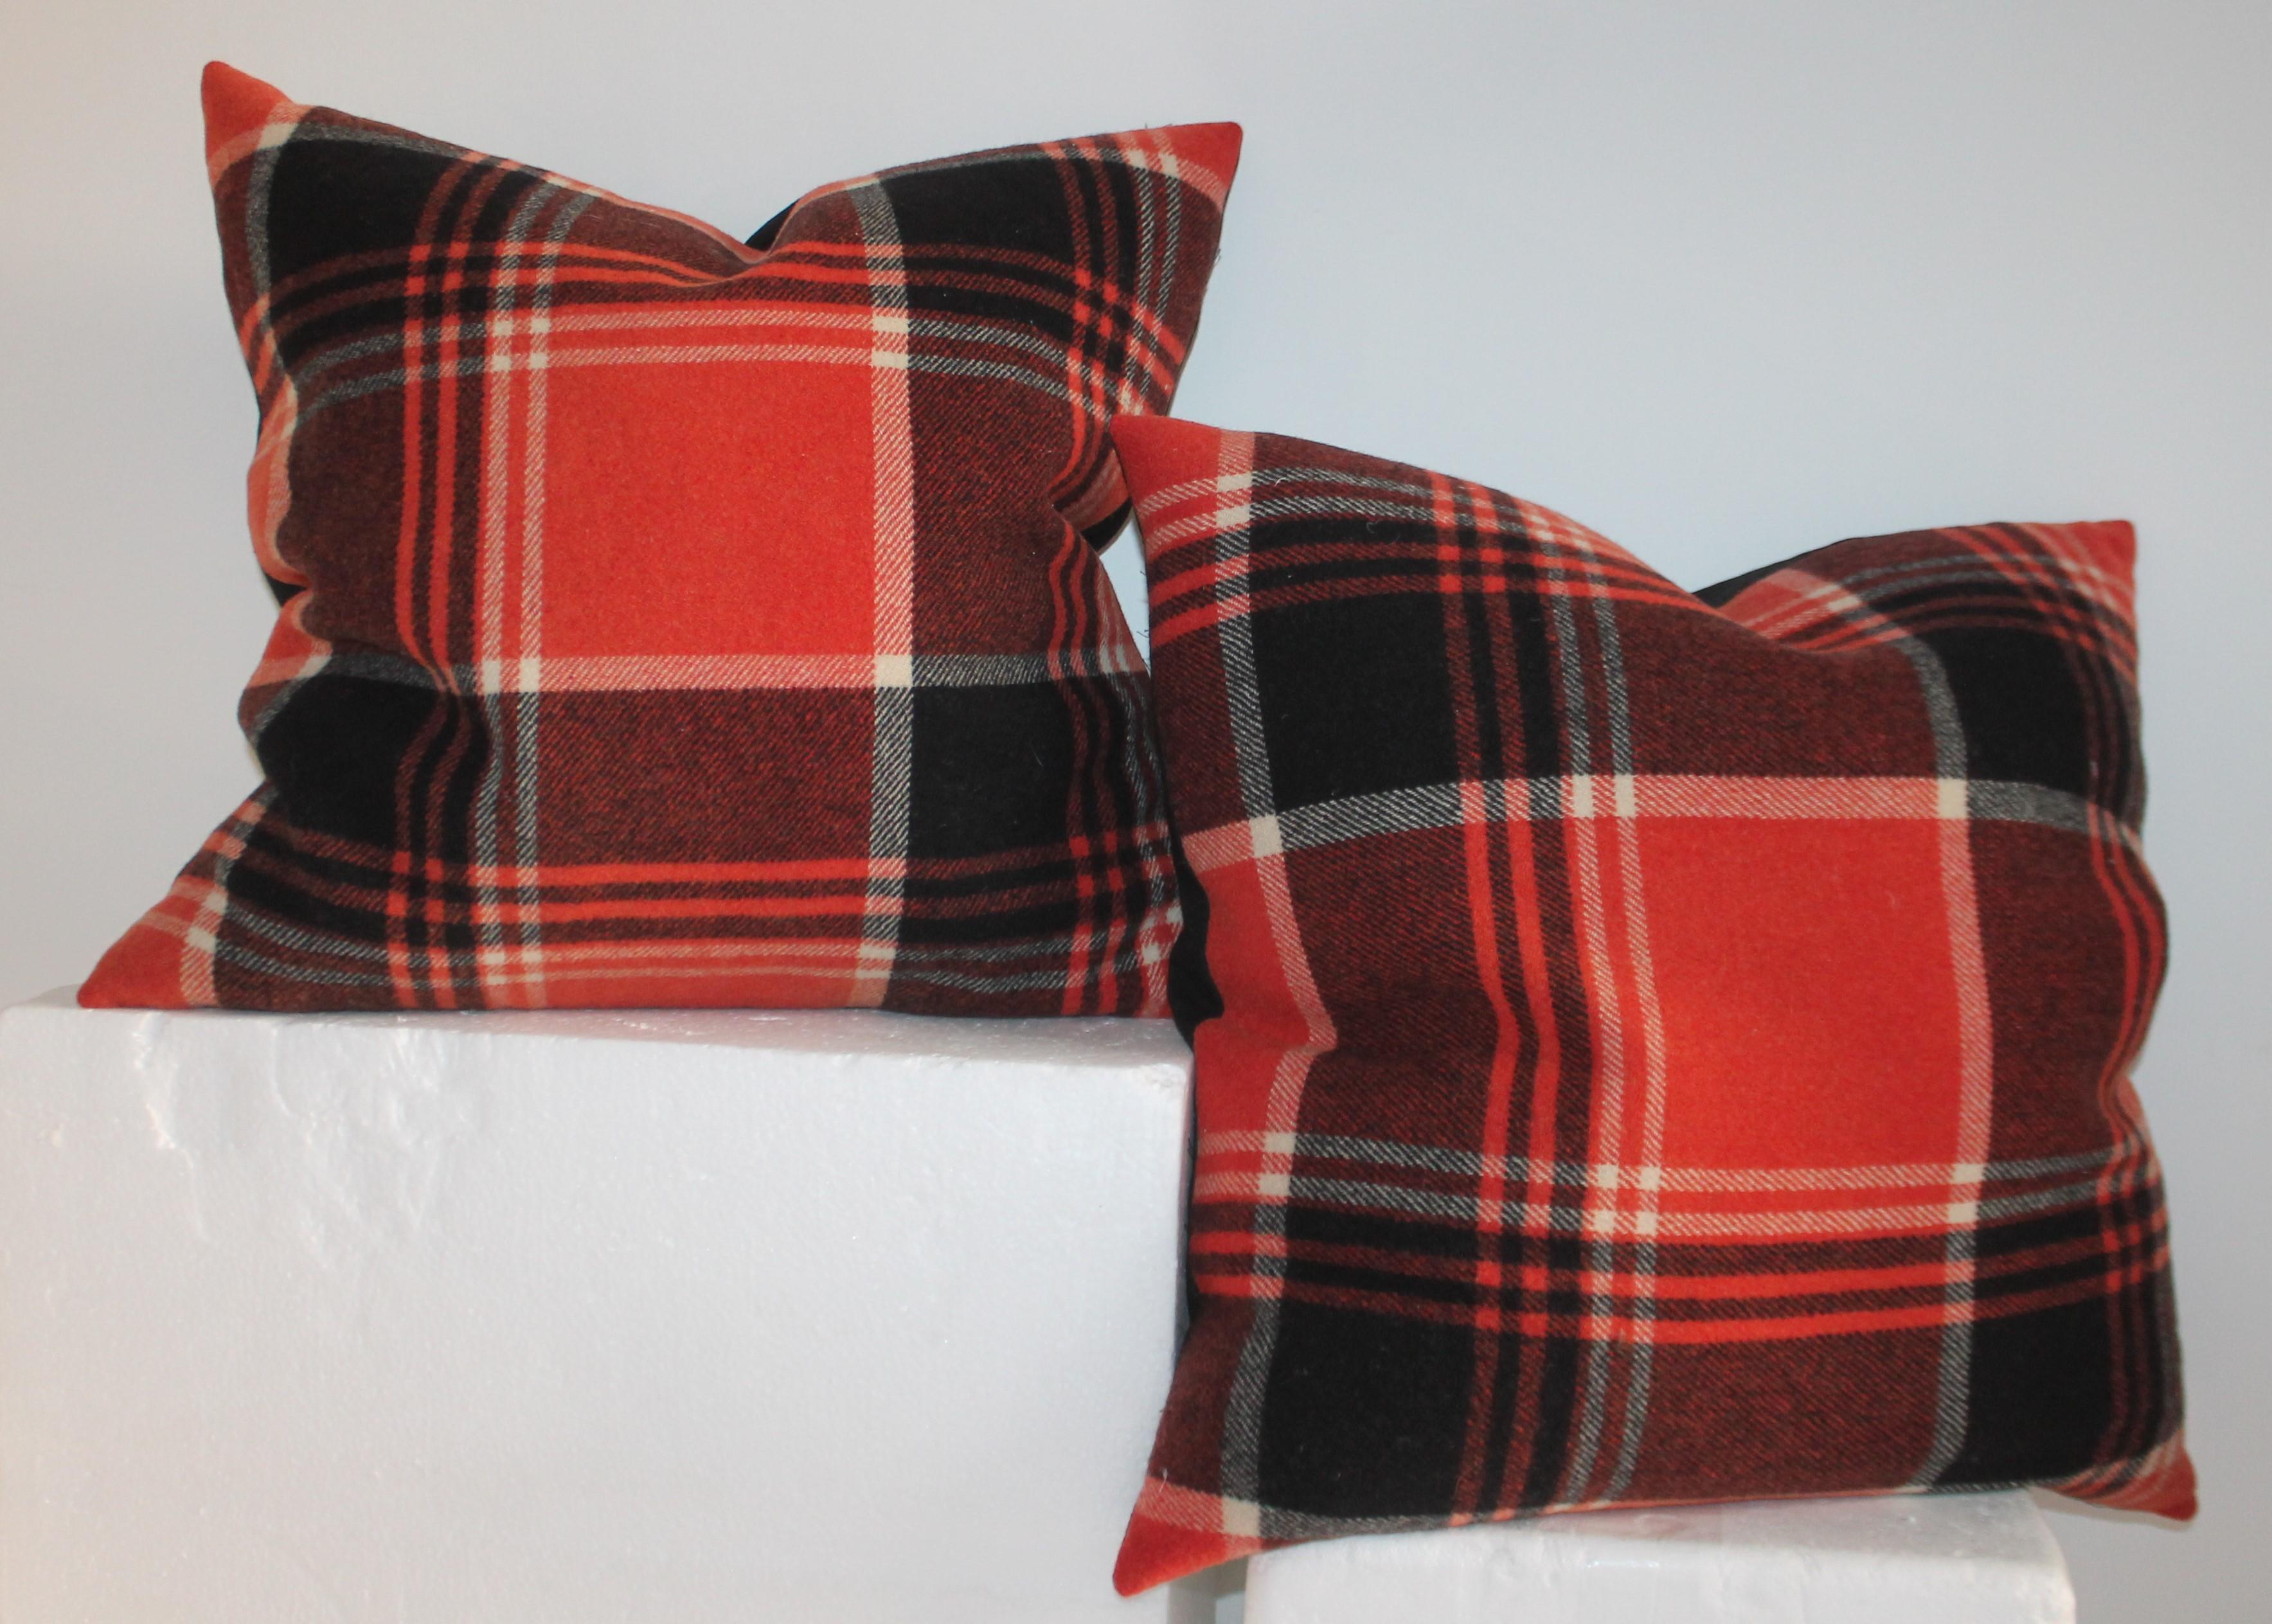 Adirondack Collection of Four Plaid Blanket Pillows